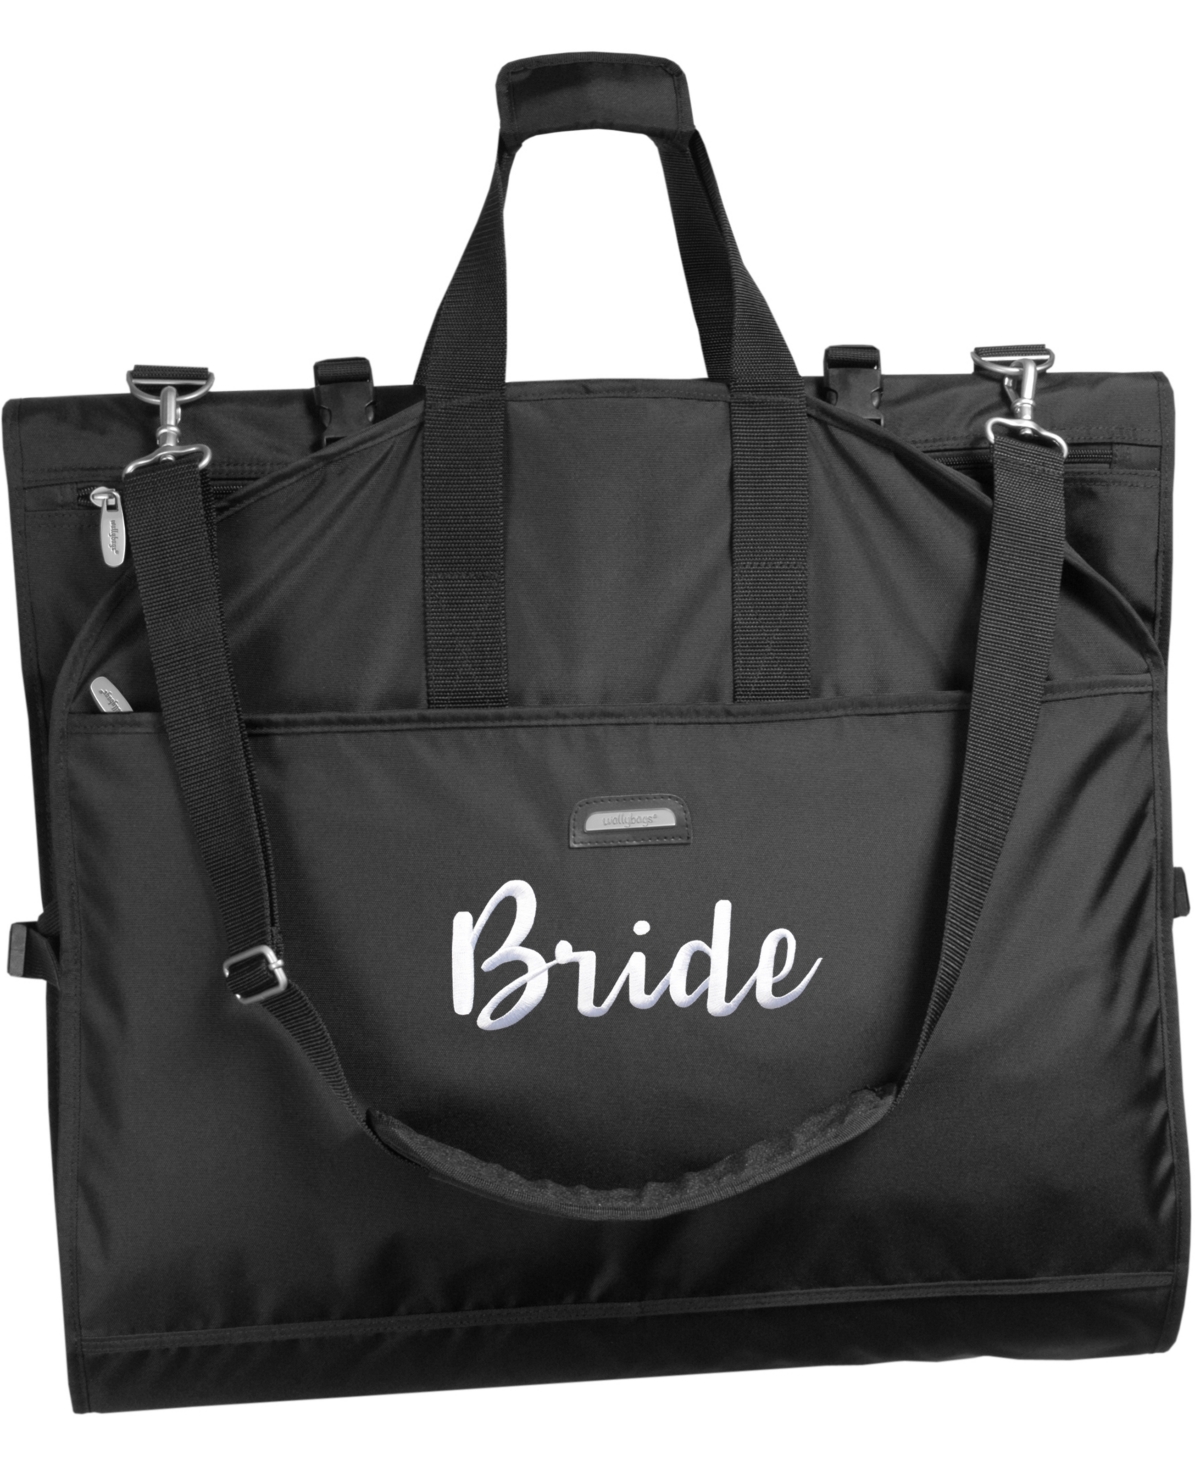 66" Premium Tri-Fold Carry On Destination Wedding Gown Travel Bag with Pockets and Bride Embroidery - Black - B